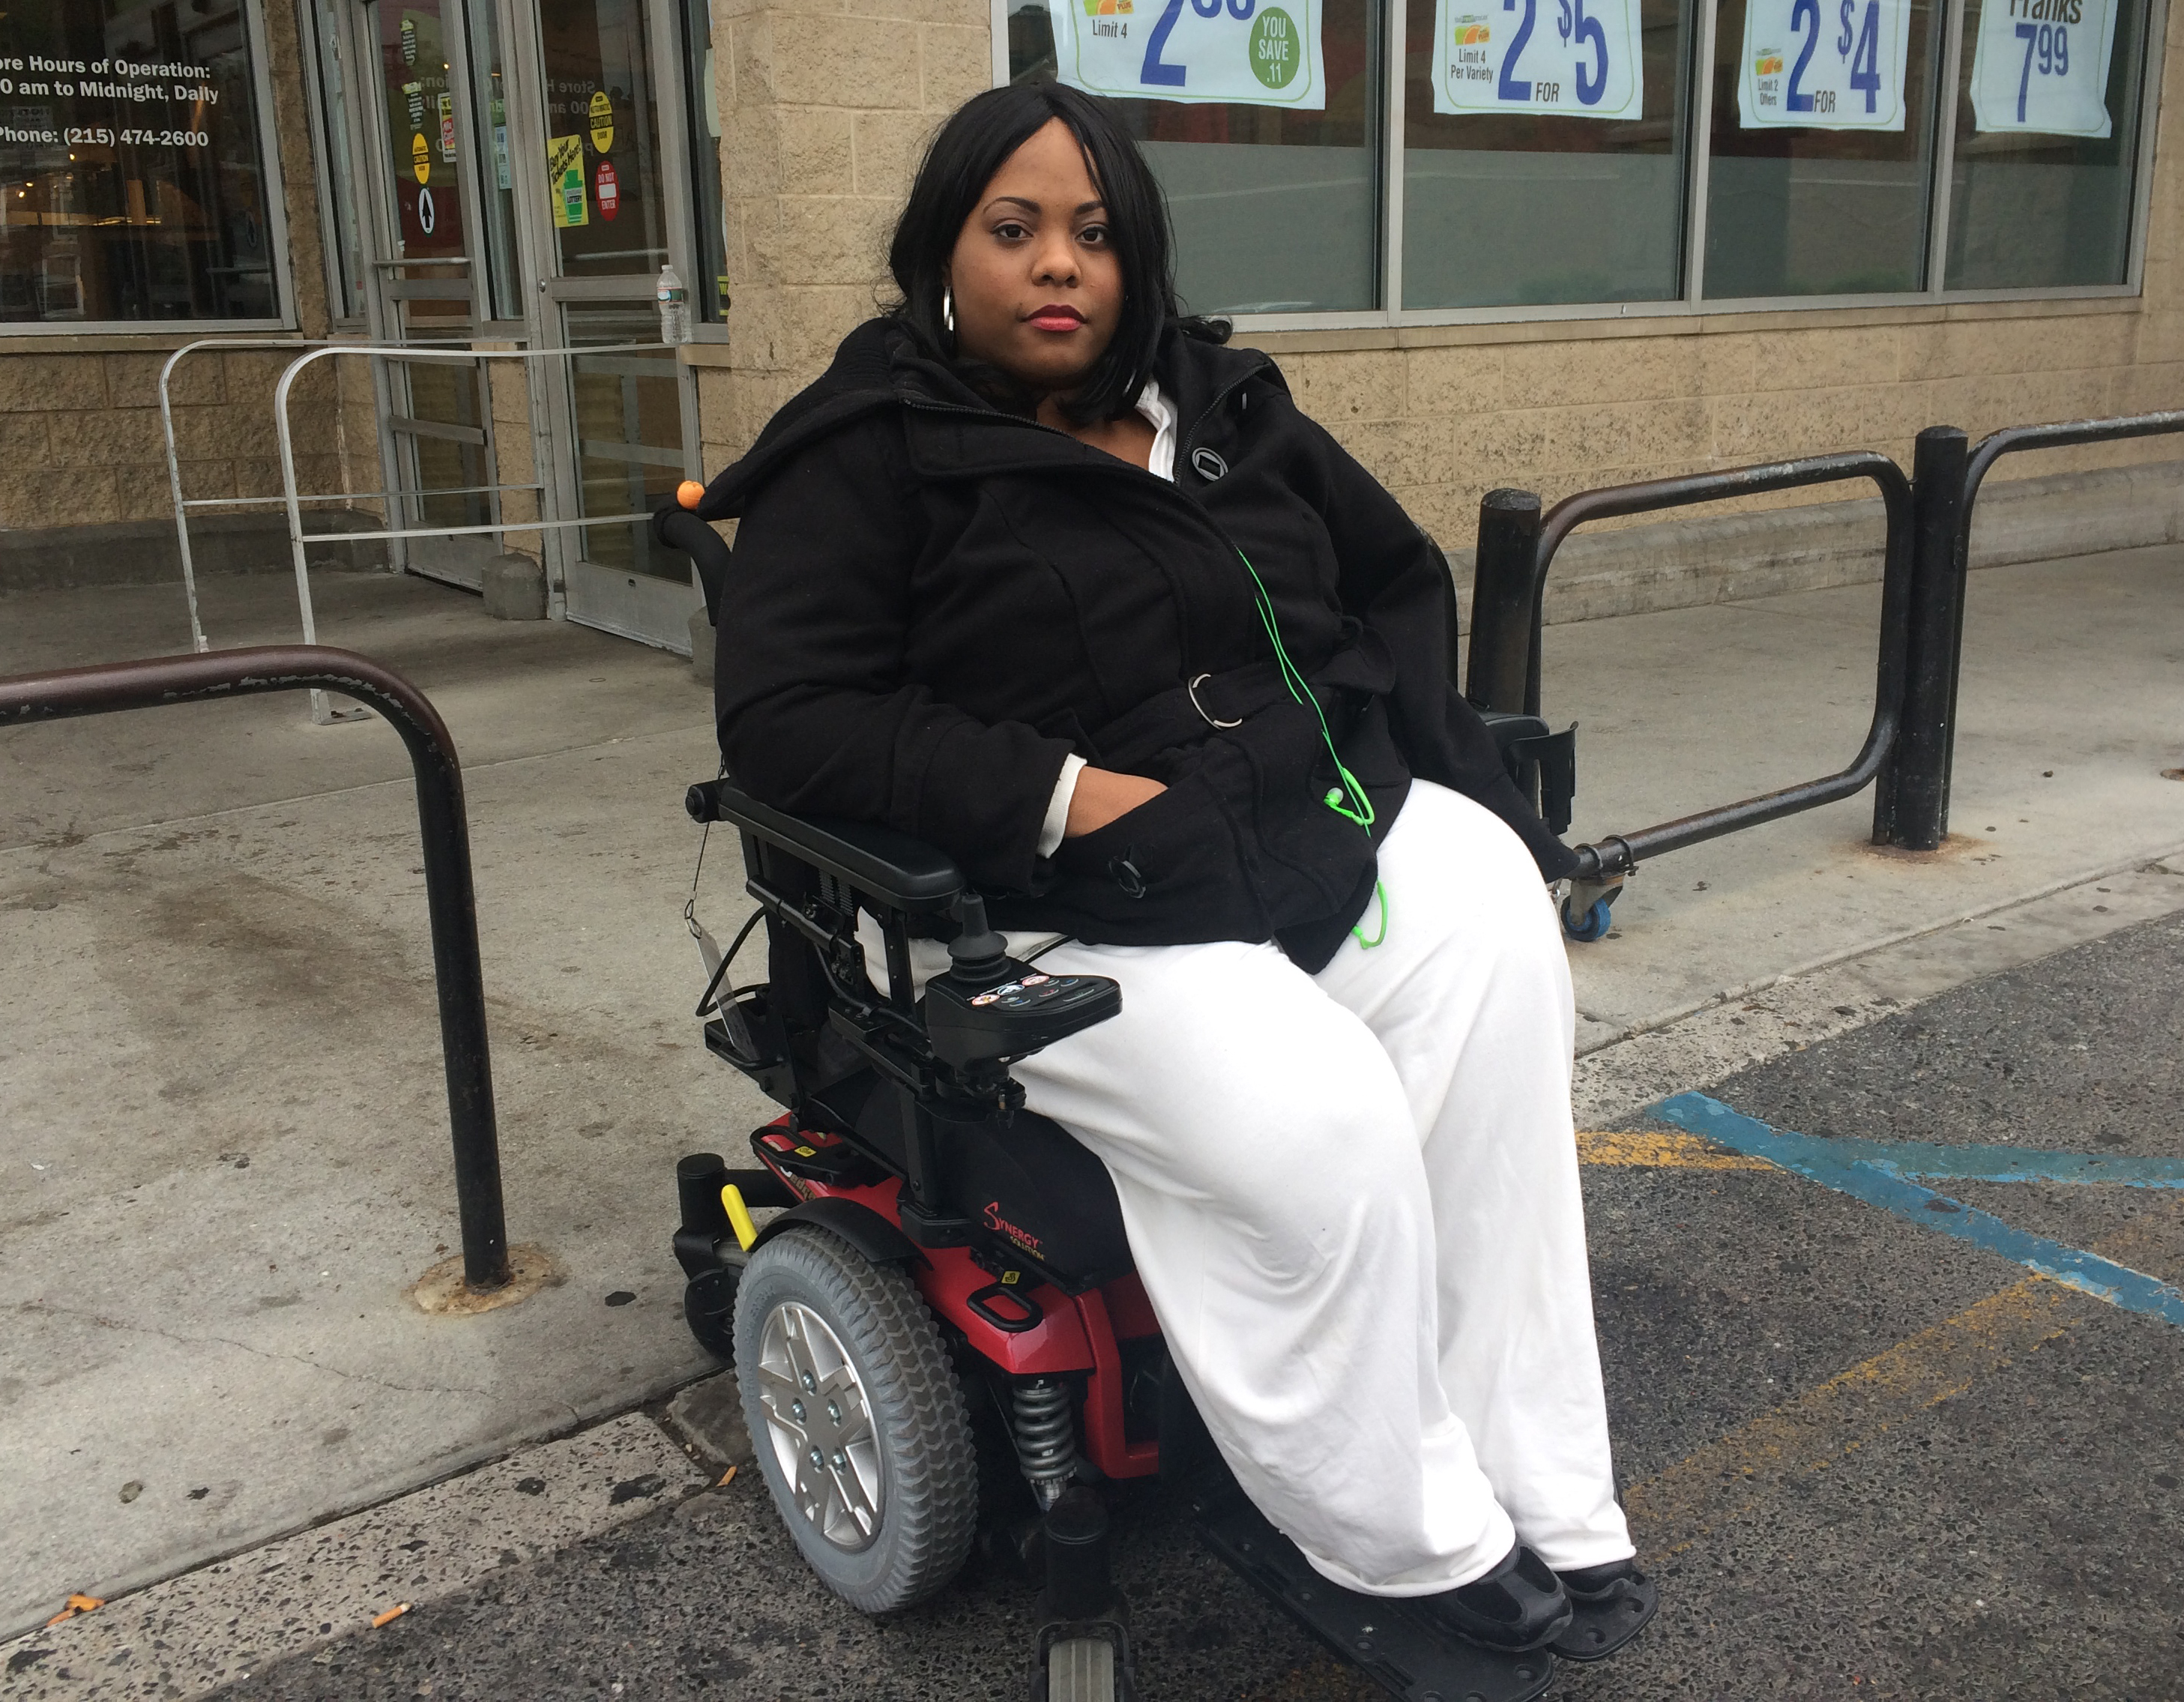 Woman in Wheelchair Fed Up Being Locked Out of Supermarket - NBC 10 ...